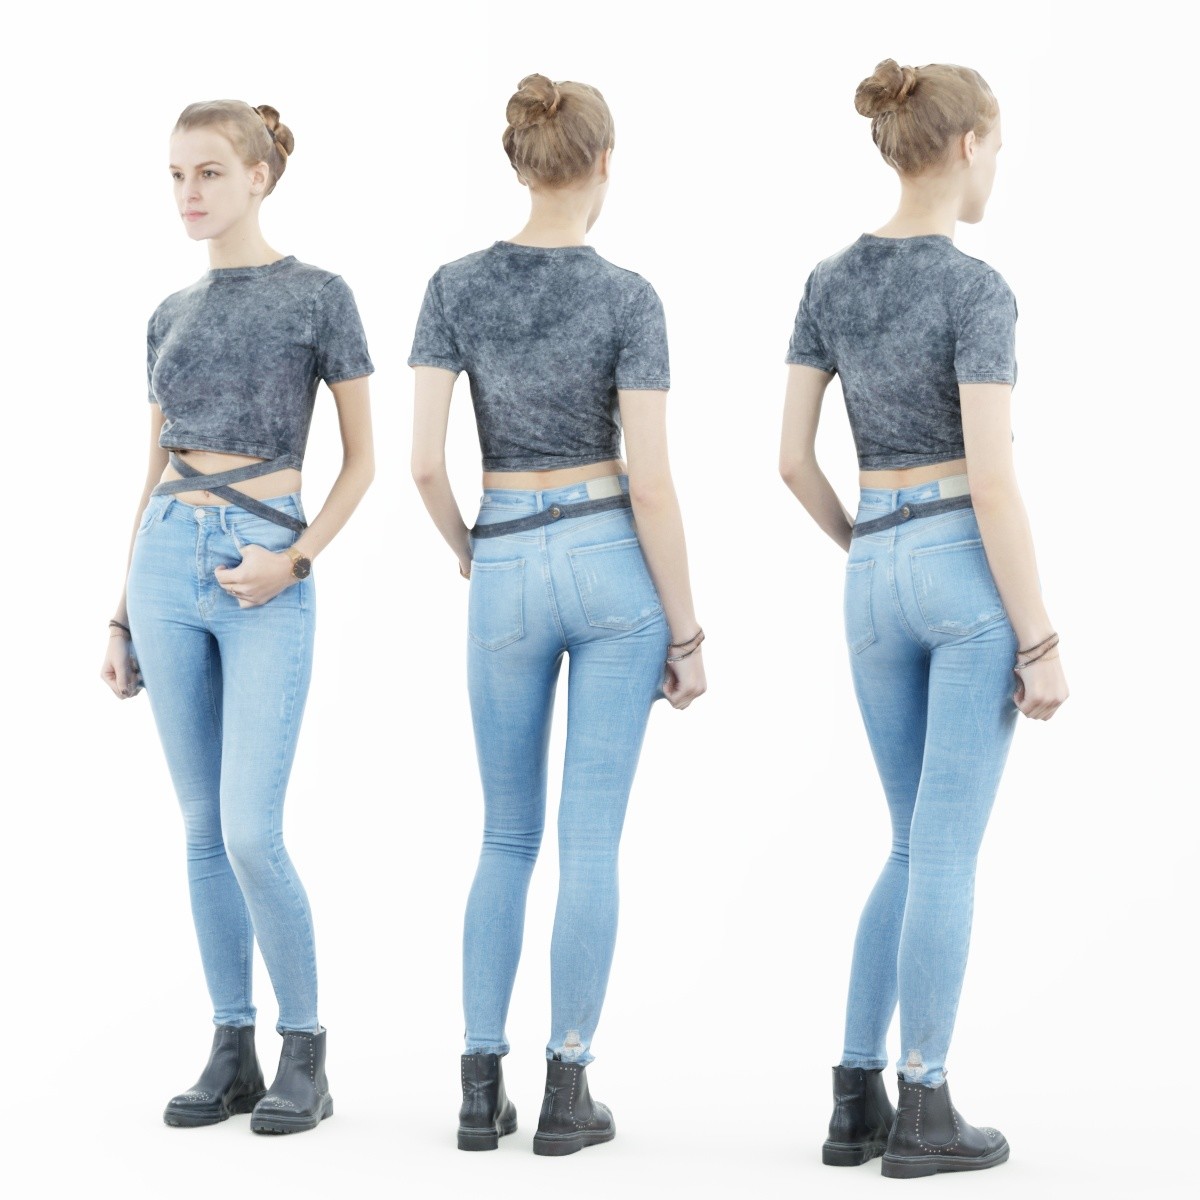 ArtStation - Girl in Jeans and Grey Top | Resources